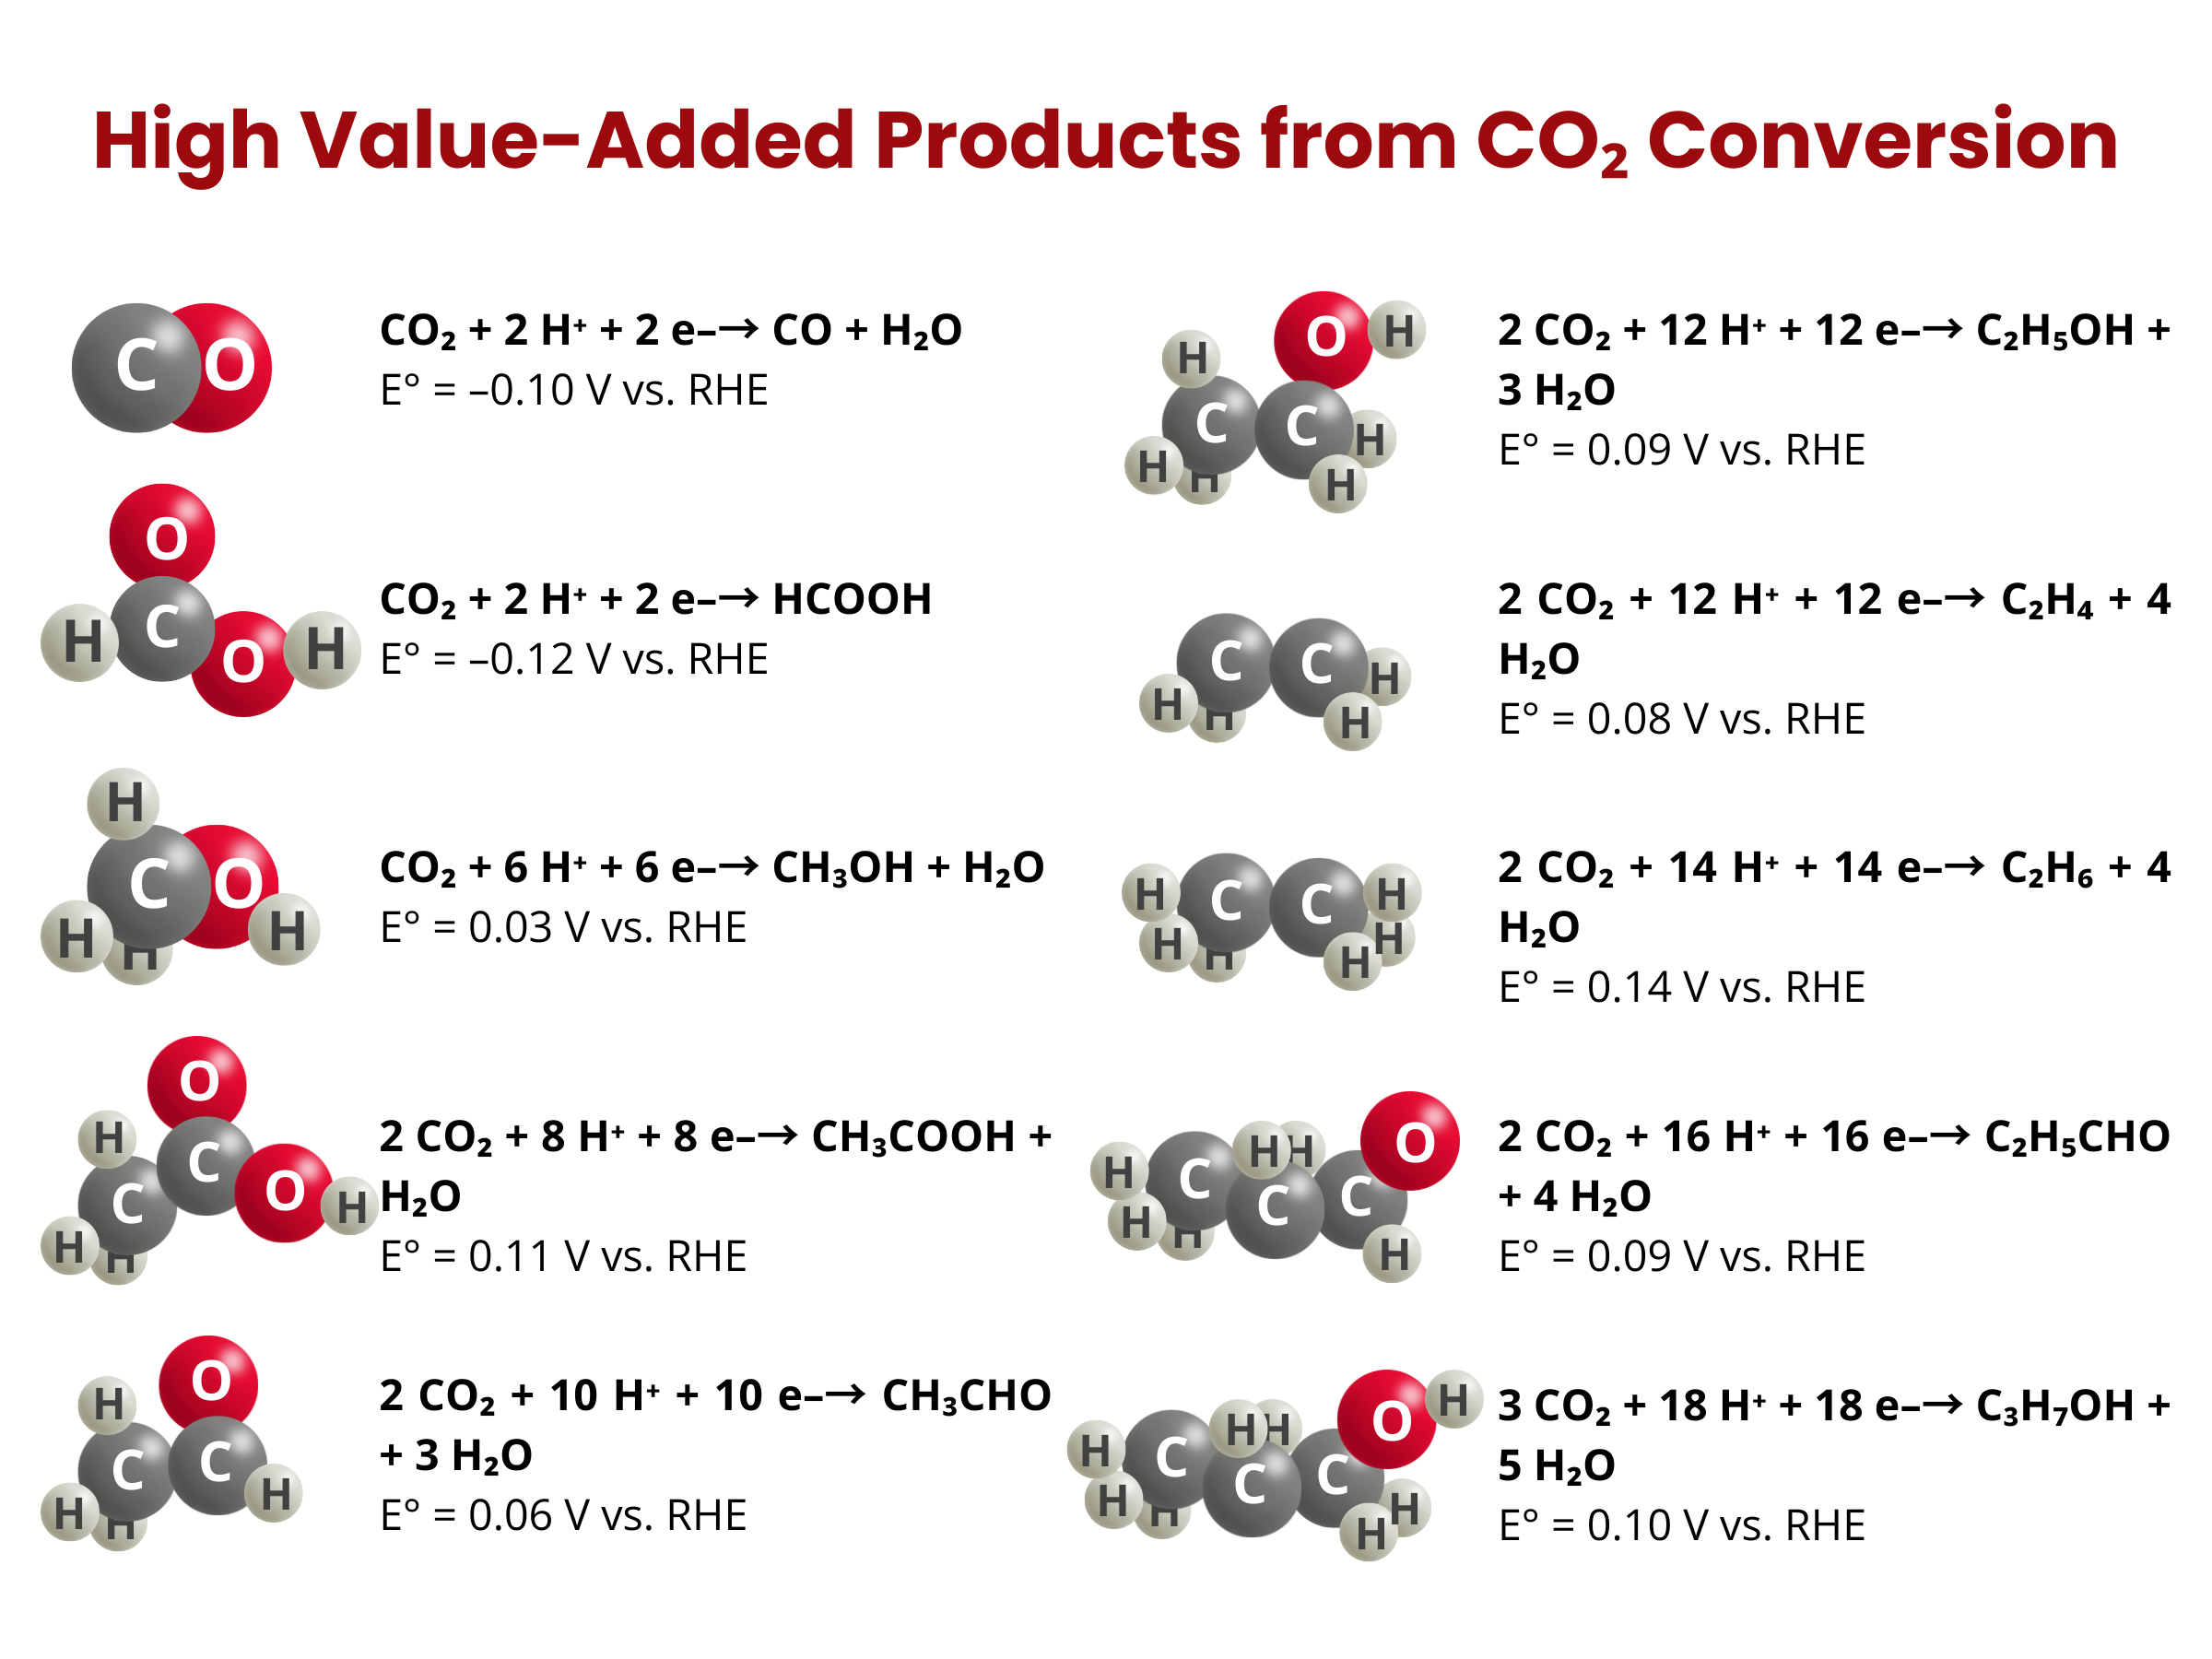 High Value-Added Products from Carbon Dioxide Conversion